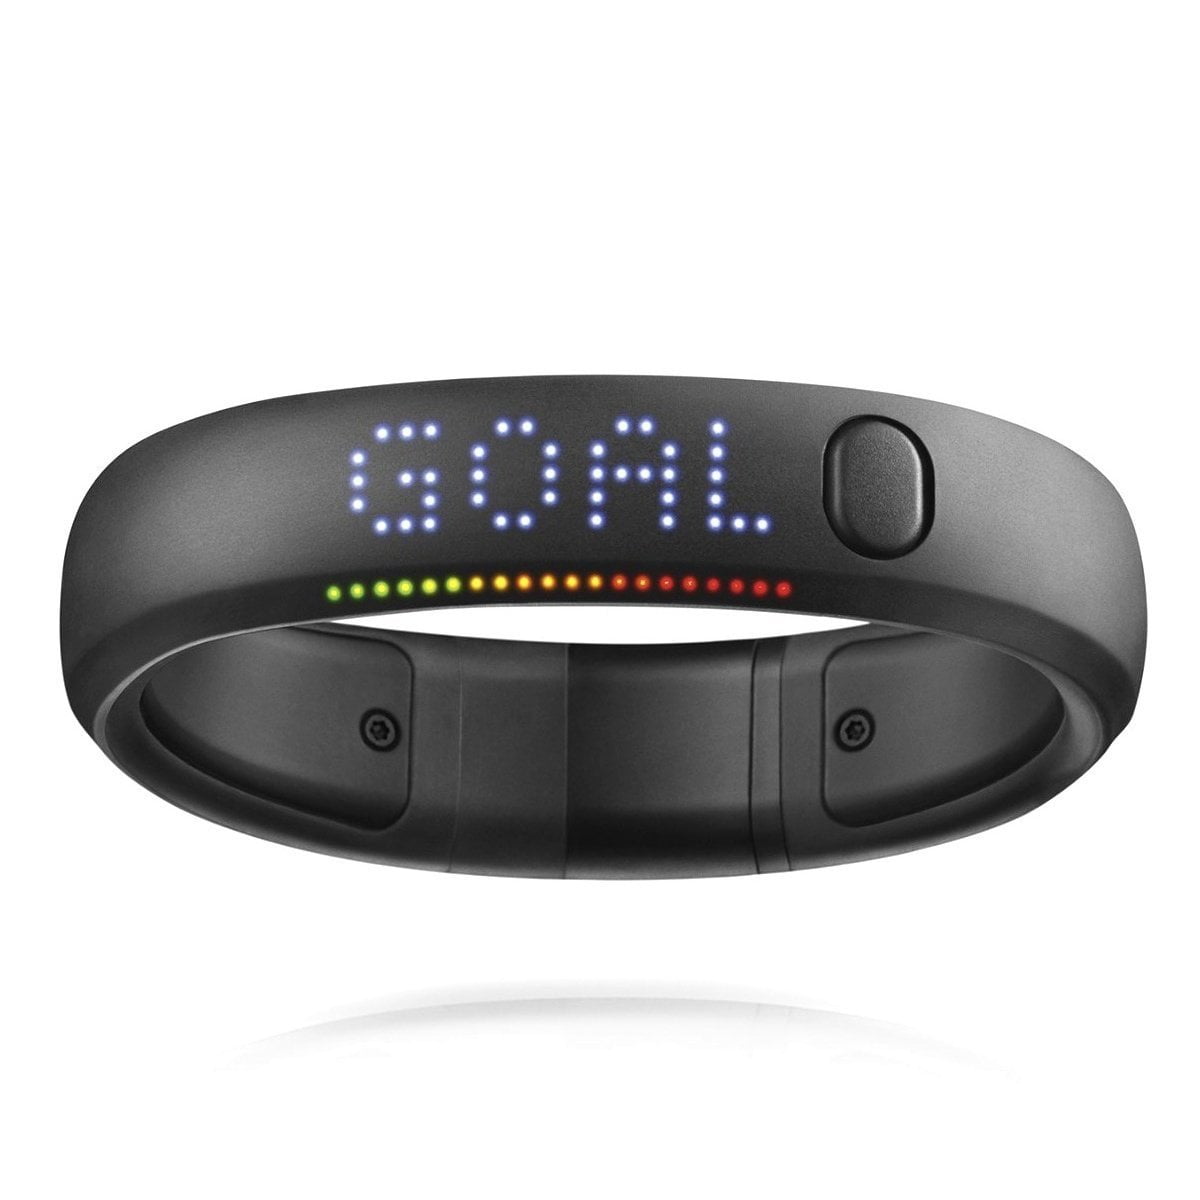 Nike+ FuelBand In-Depth Review | DC Rainmaker